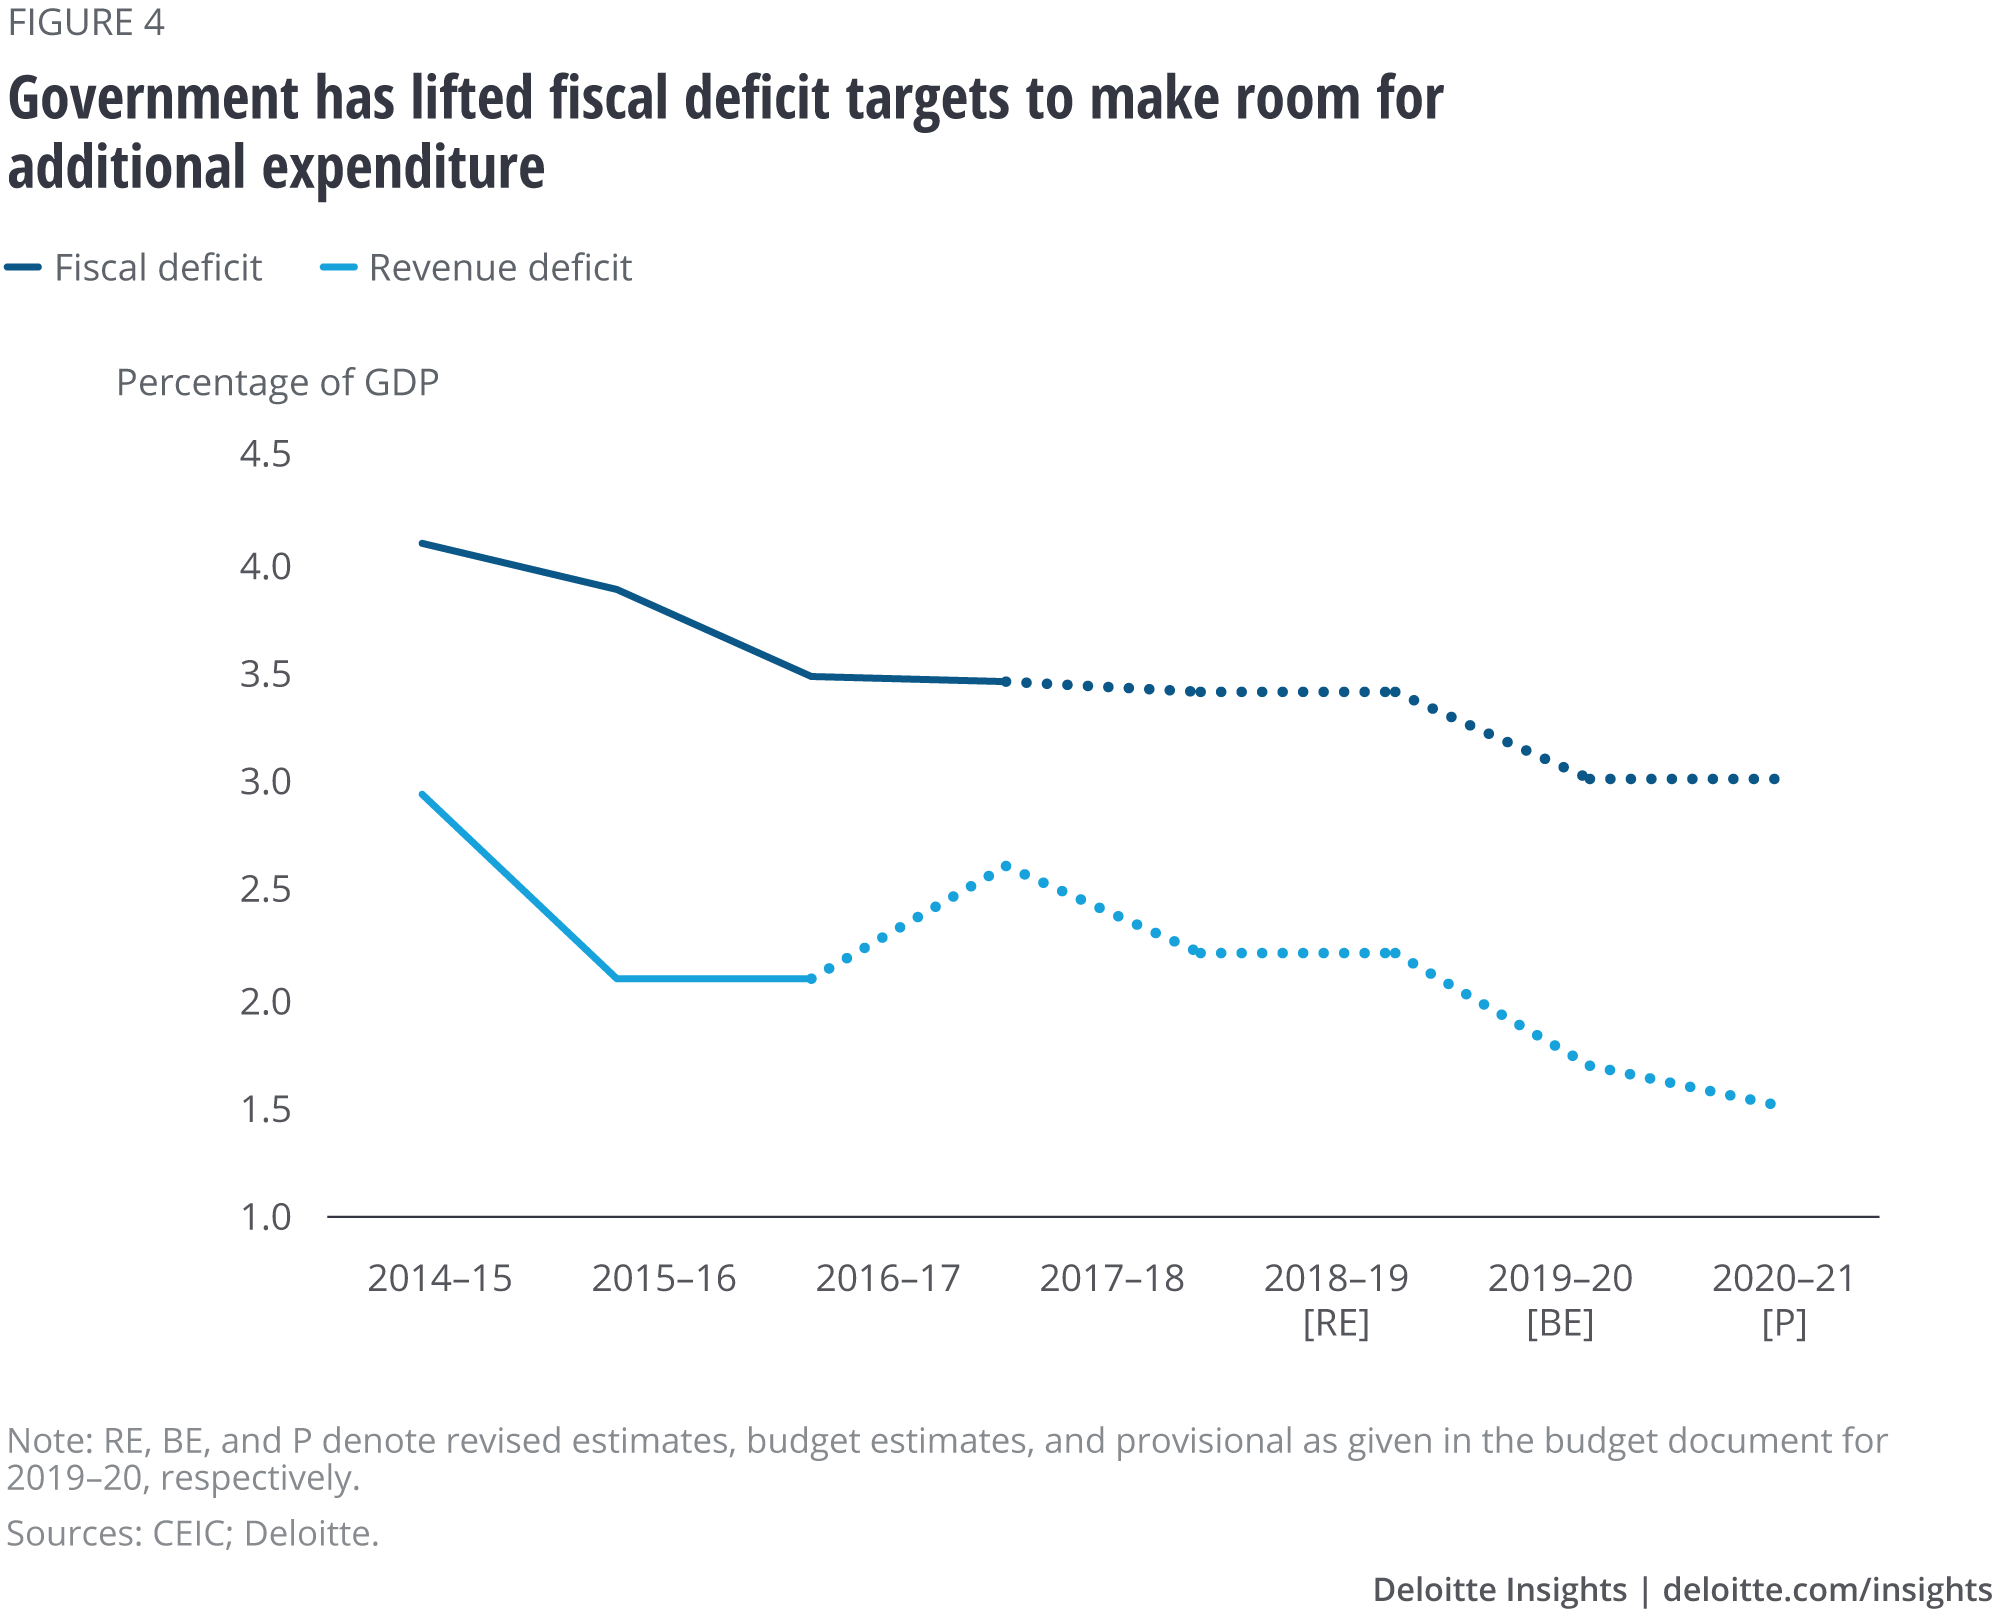 Government has lifted fiscal deficit targets to make room for additional expenditure